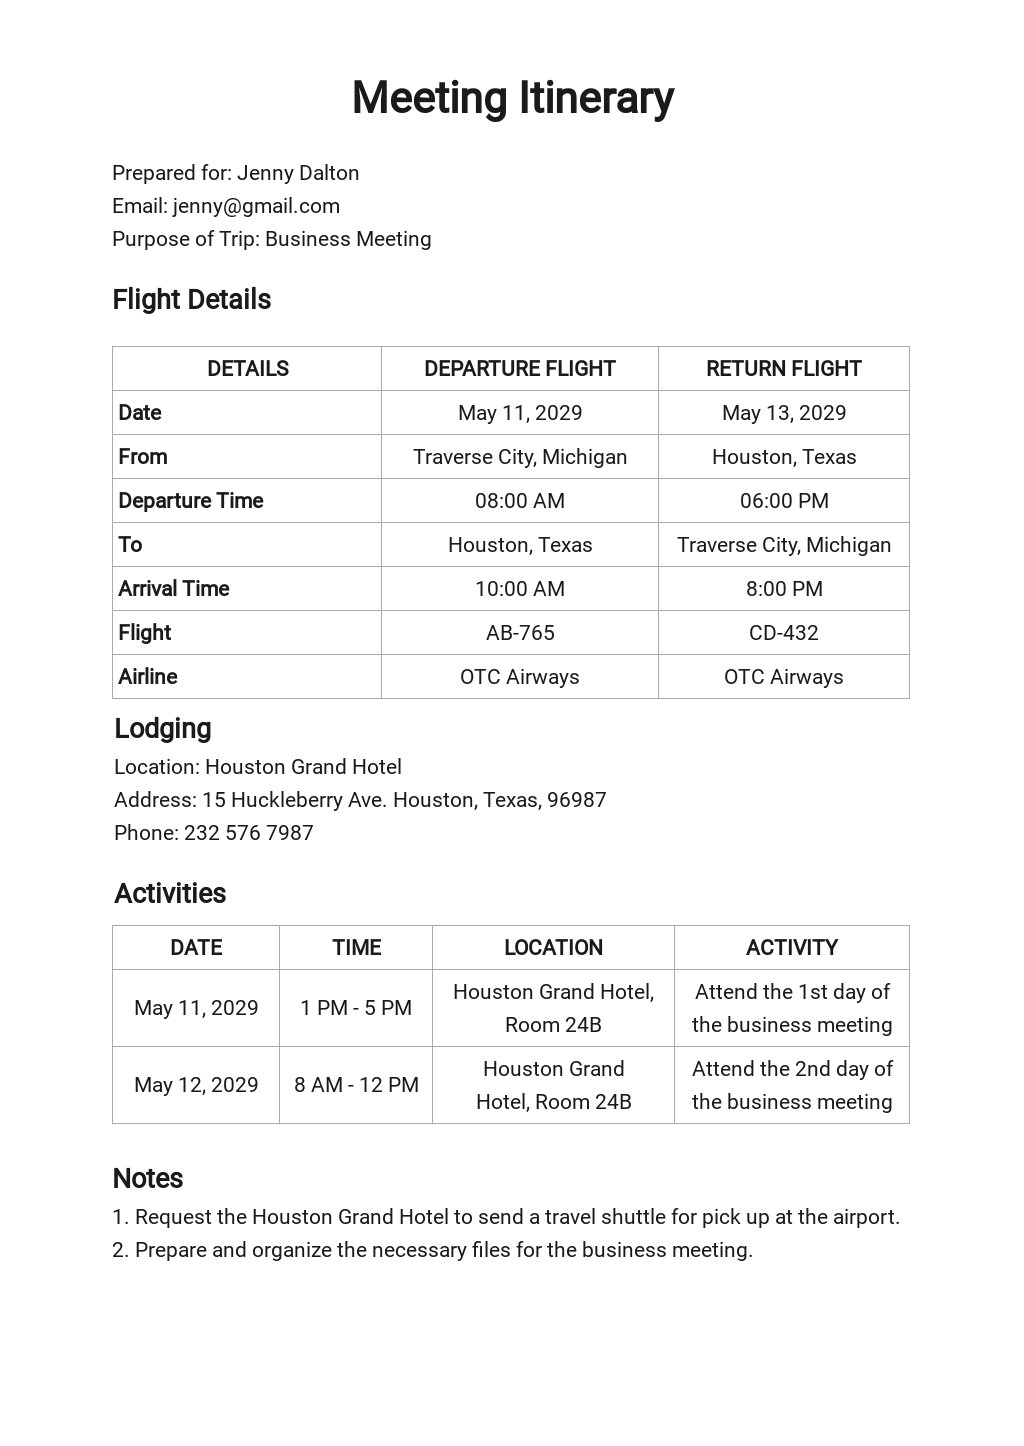 Meeting Itinerary Template Google Docs, Word